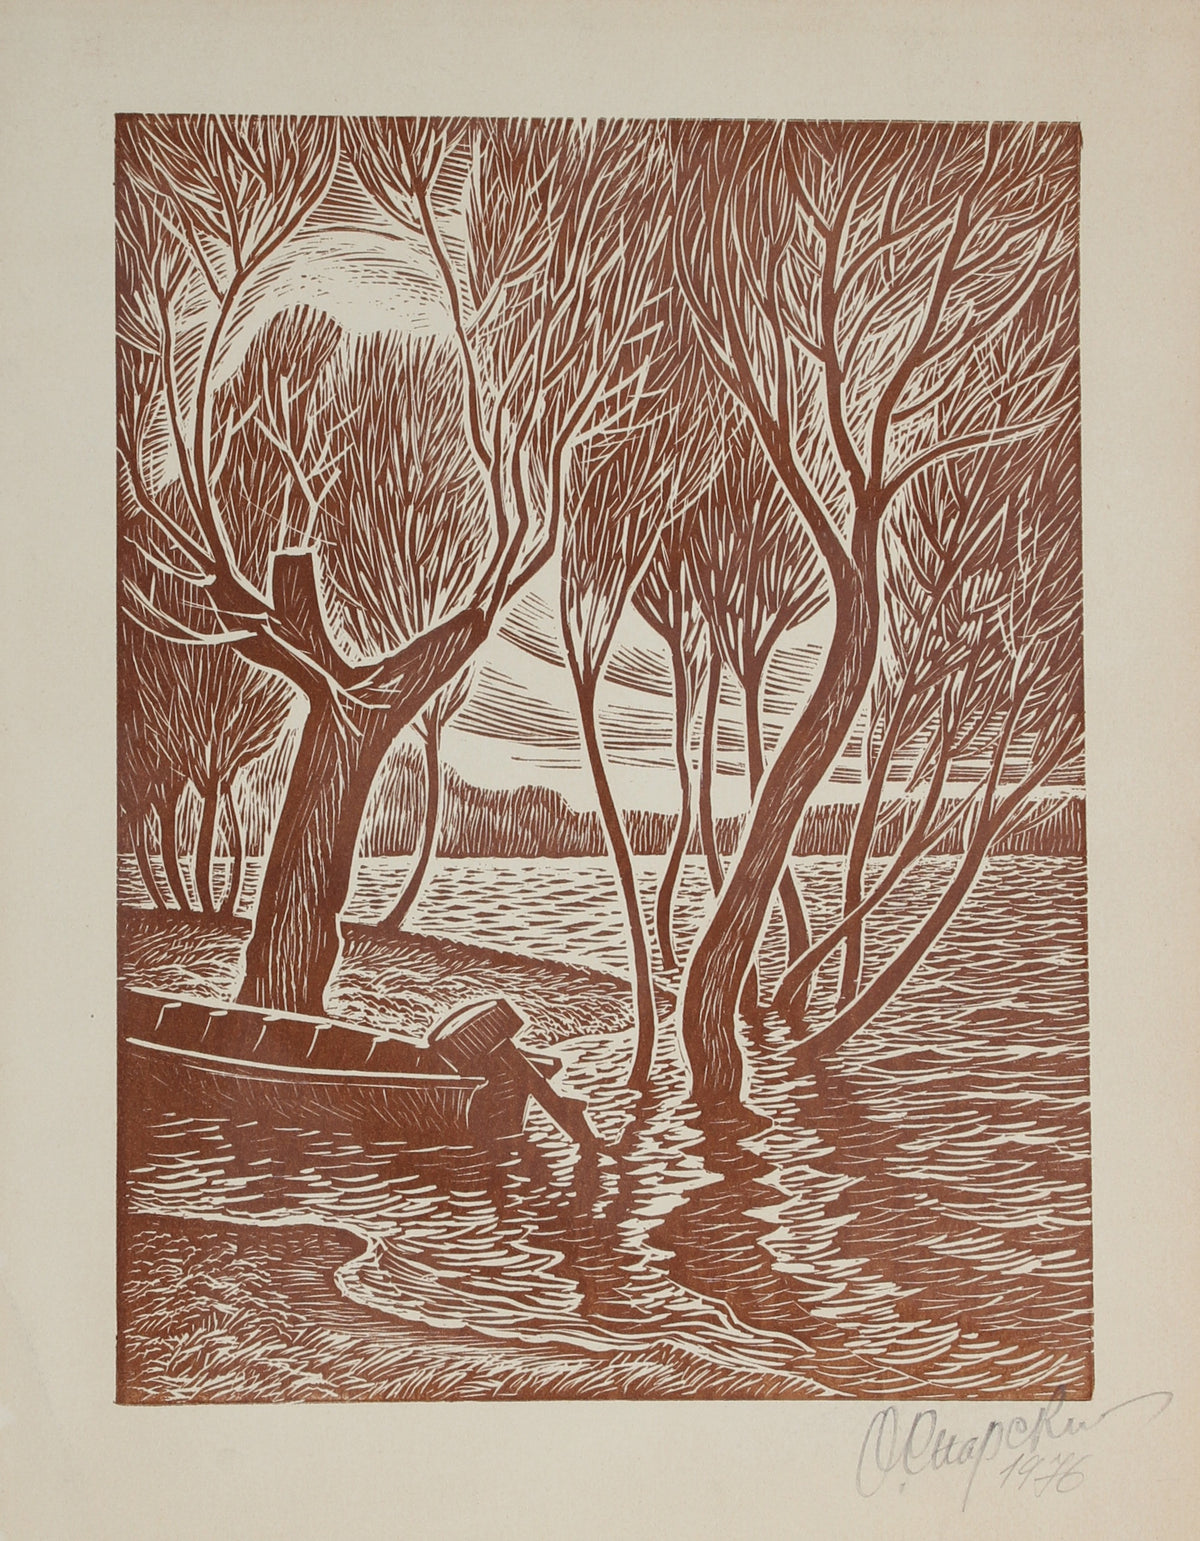 Boat &amp; Trees on the River Bank&lt;br&gt;1976 Linoleum Block&lt;br&gt;O. Starskiy&lt;br&gt;&lt;br&gt;#A3006